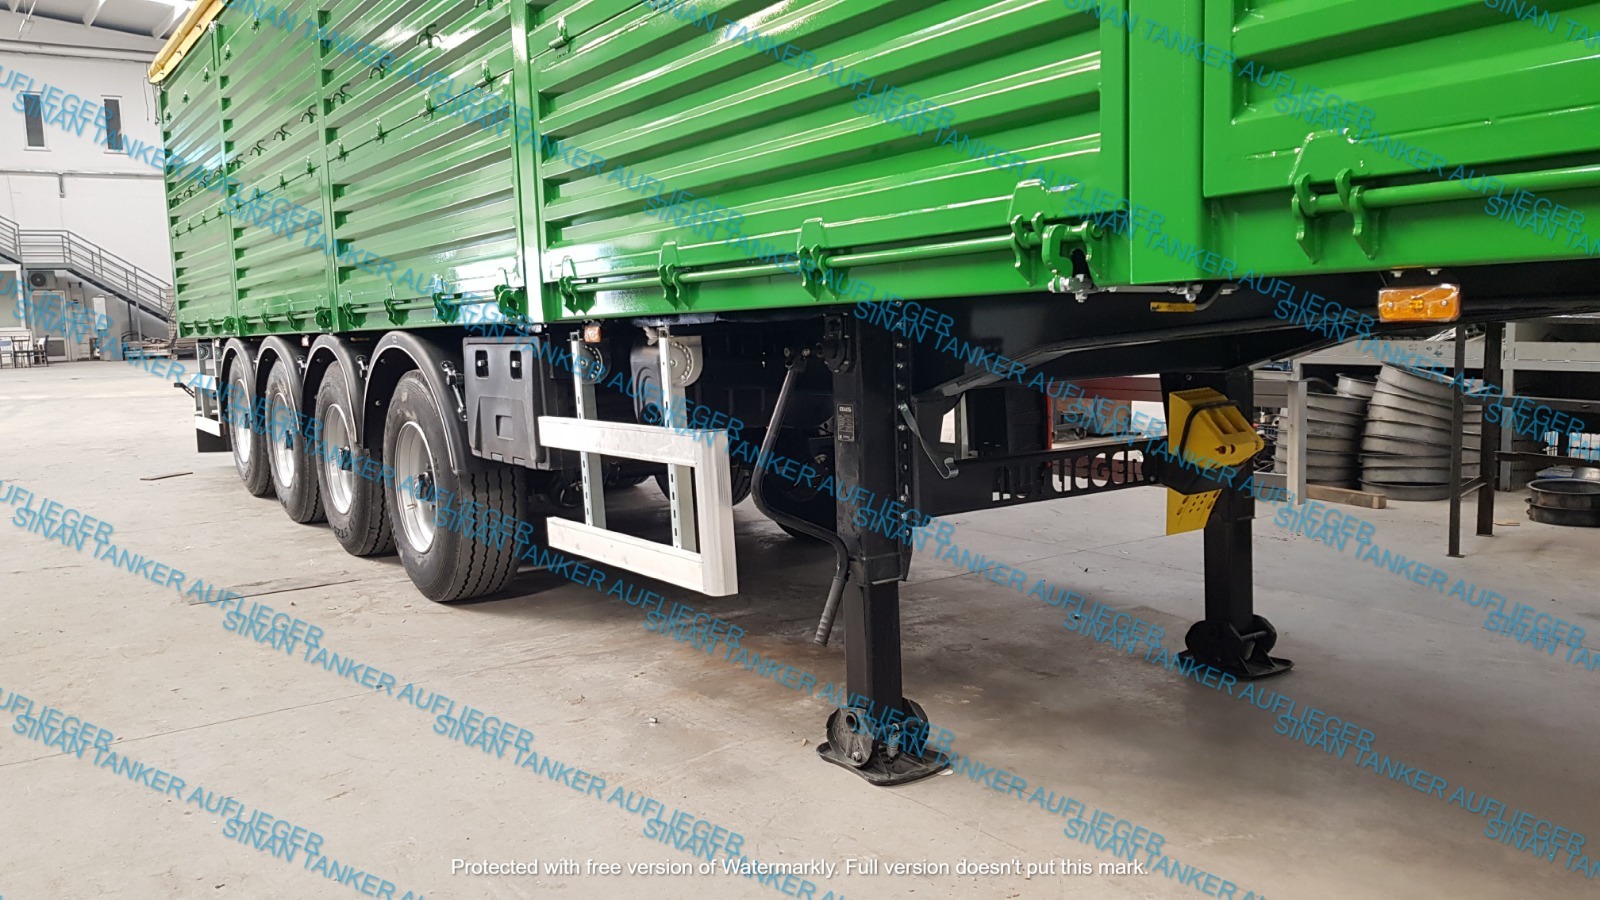 SİNANLI TANKER - TRAILER undefined: photos 17